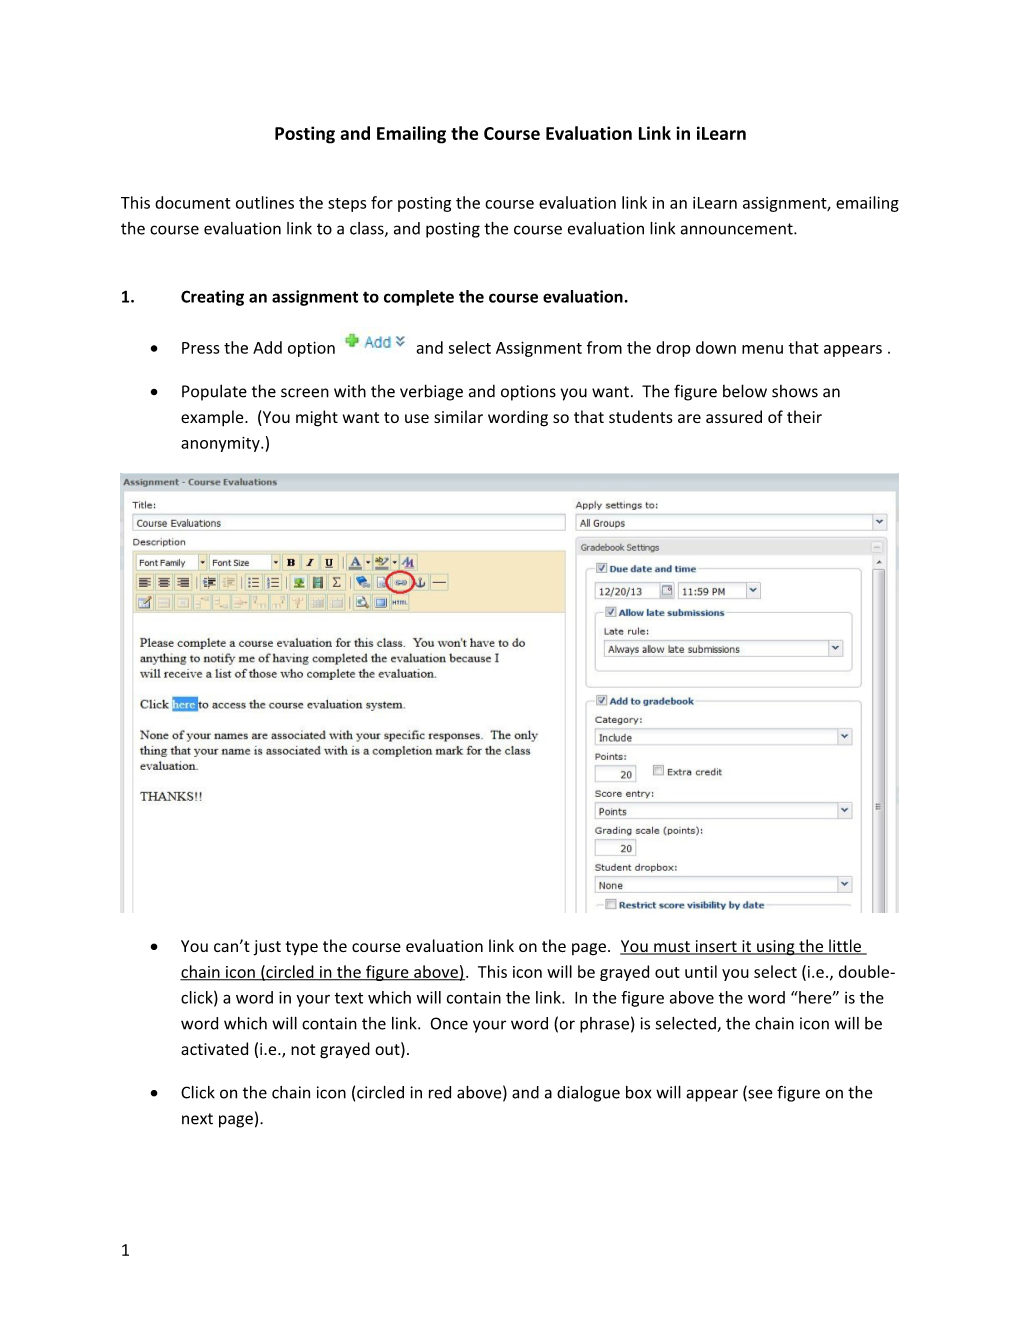 Posting and Emailing the Course Evaluation Link in Ilearn